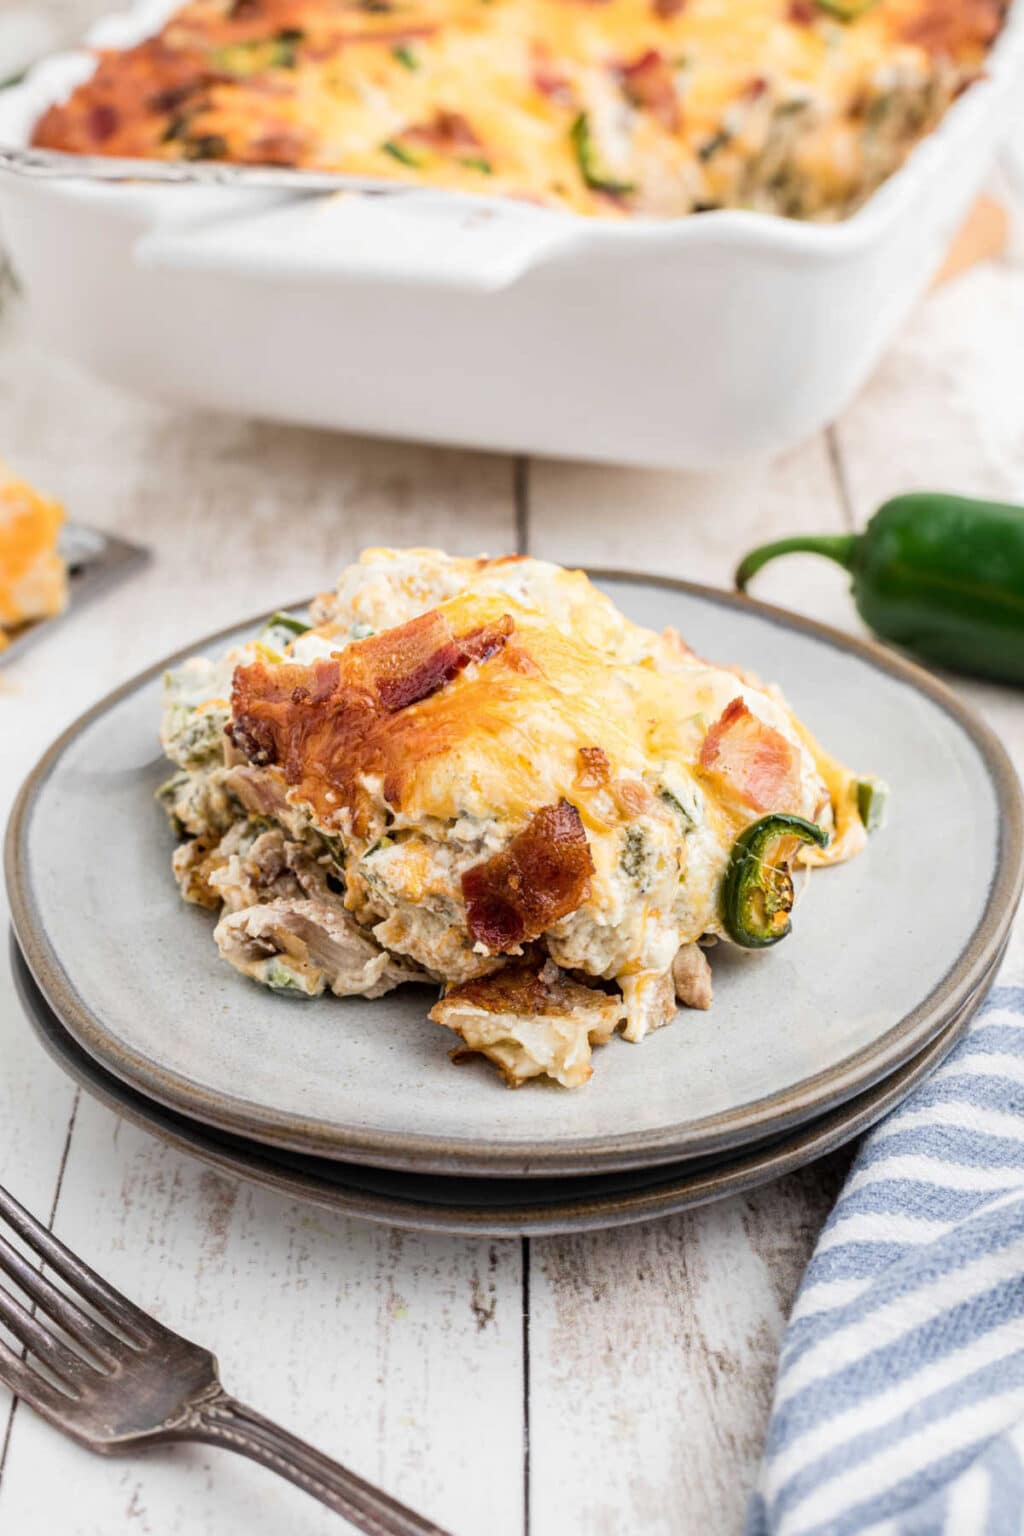 Jalapeno Popper Tater Tot Casserole | The Cagle Diaries